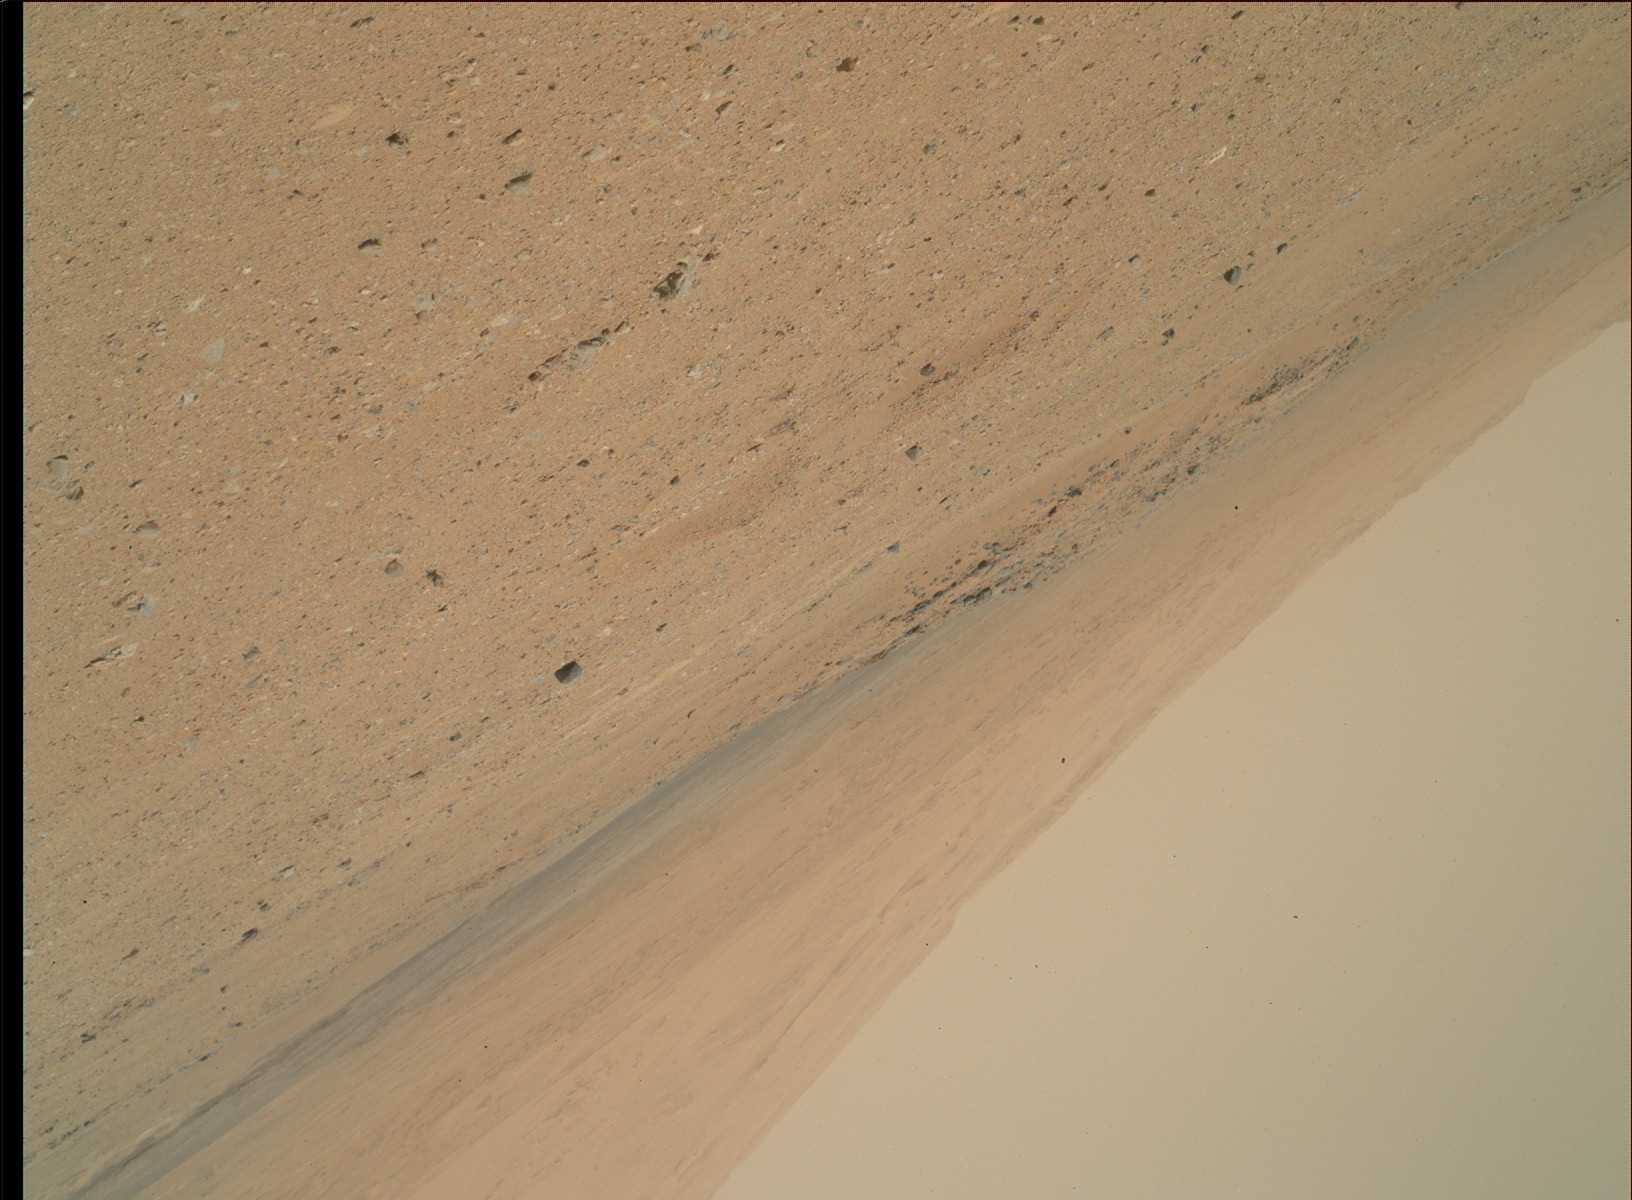 Nasa's Mars rover Curiosity acquired this image using its Mars Hand Lens Imager (MAHLI) on Sol 363